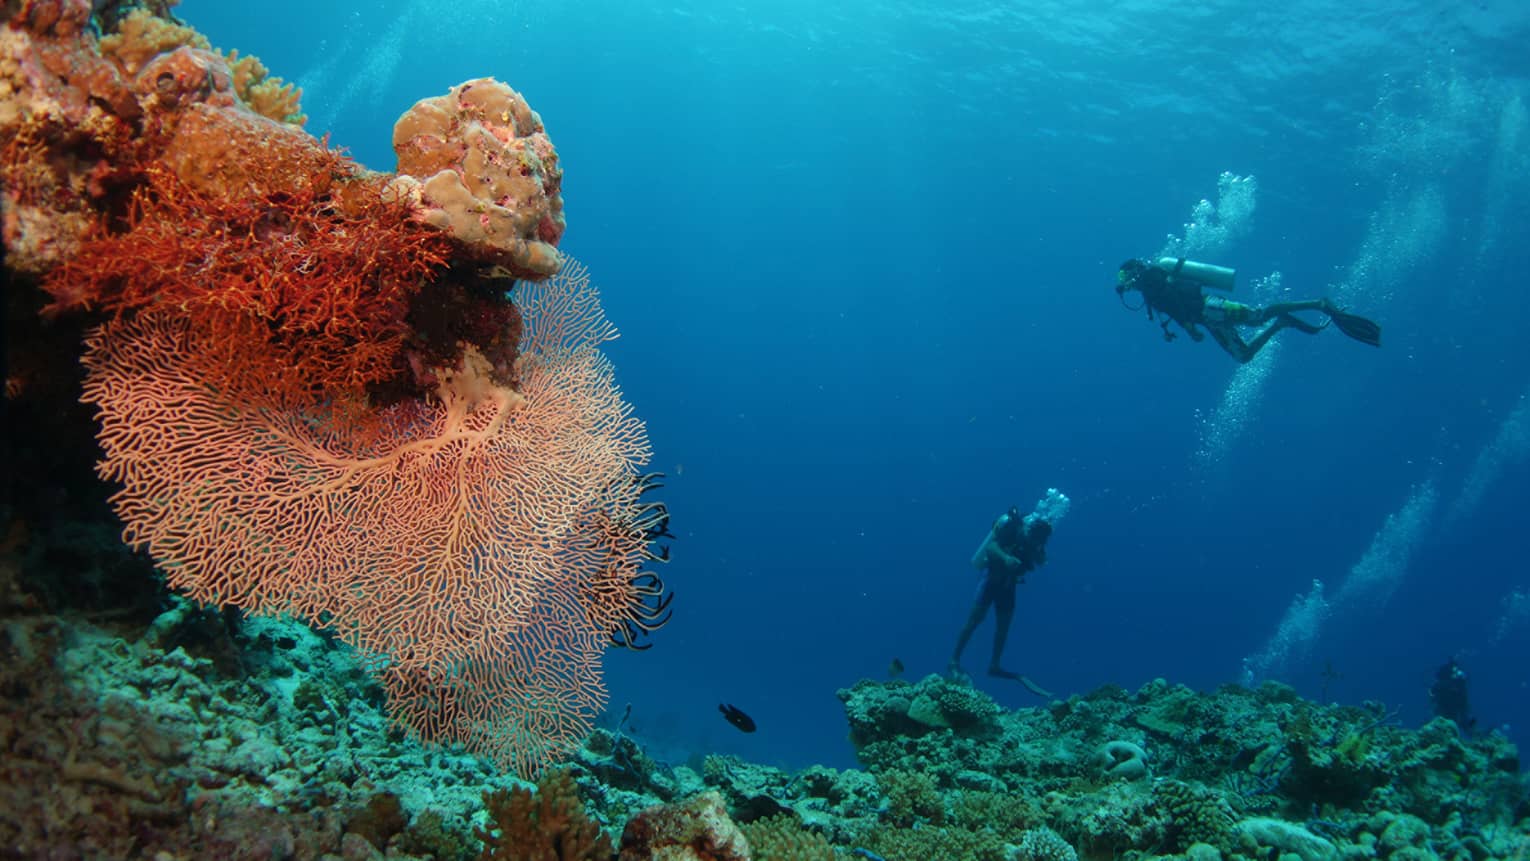 Two scuba divers underwater near colourful coral